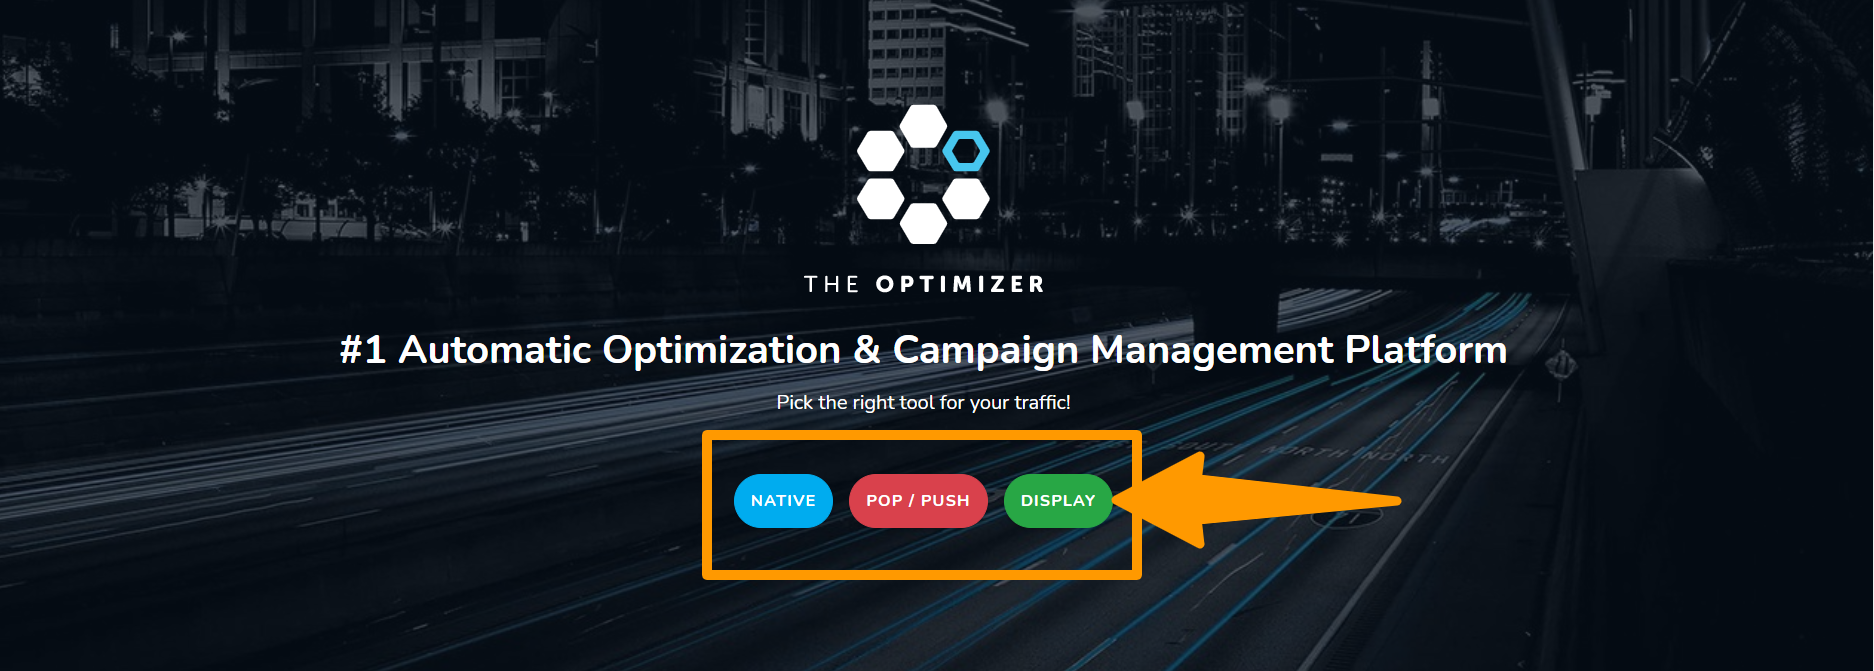 TheOptimizer- Overview